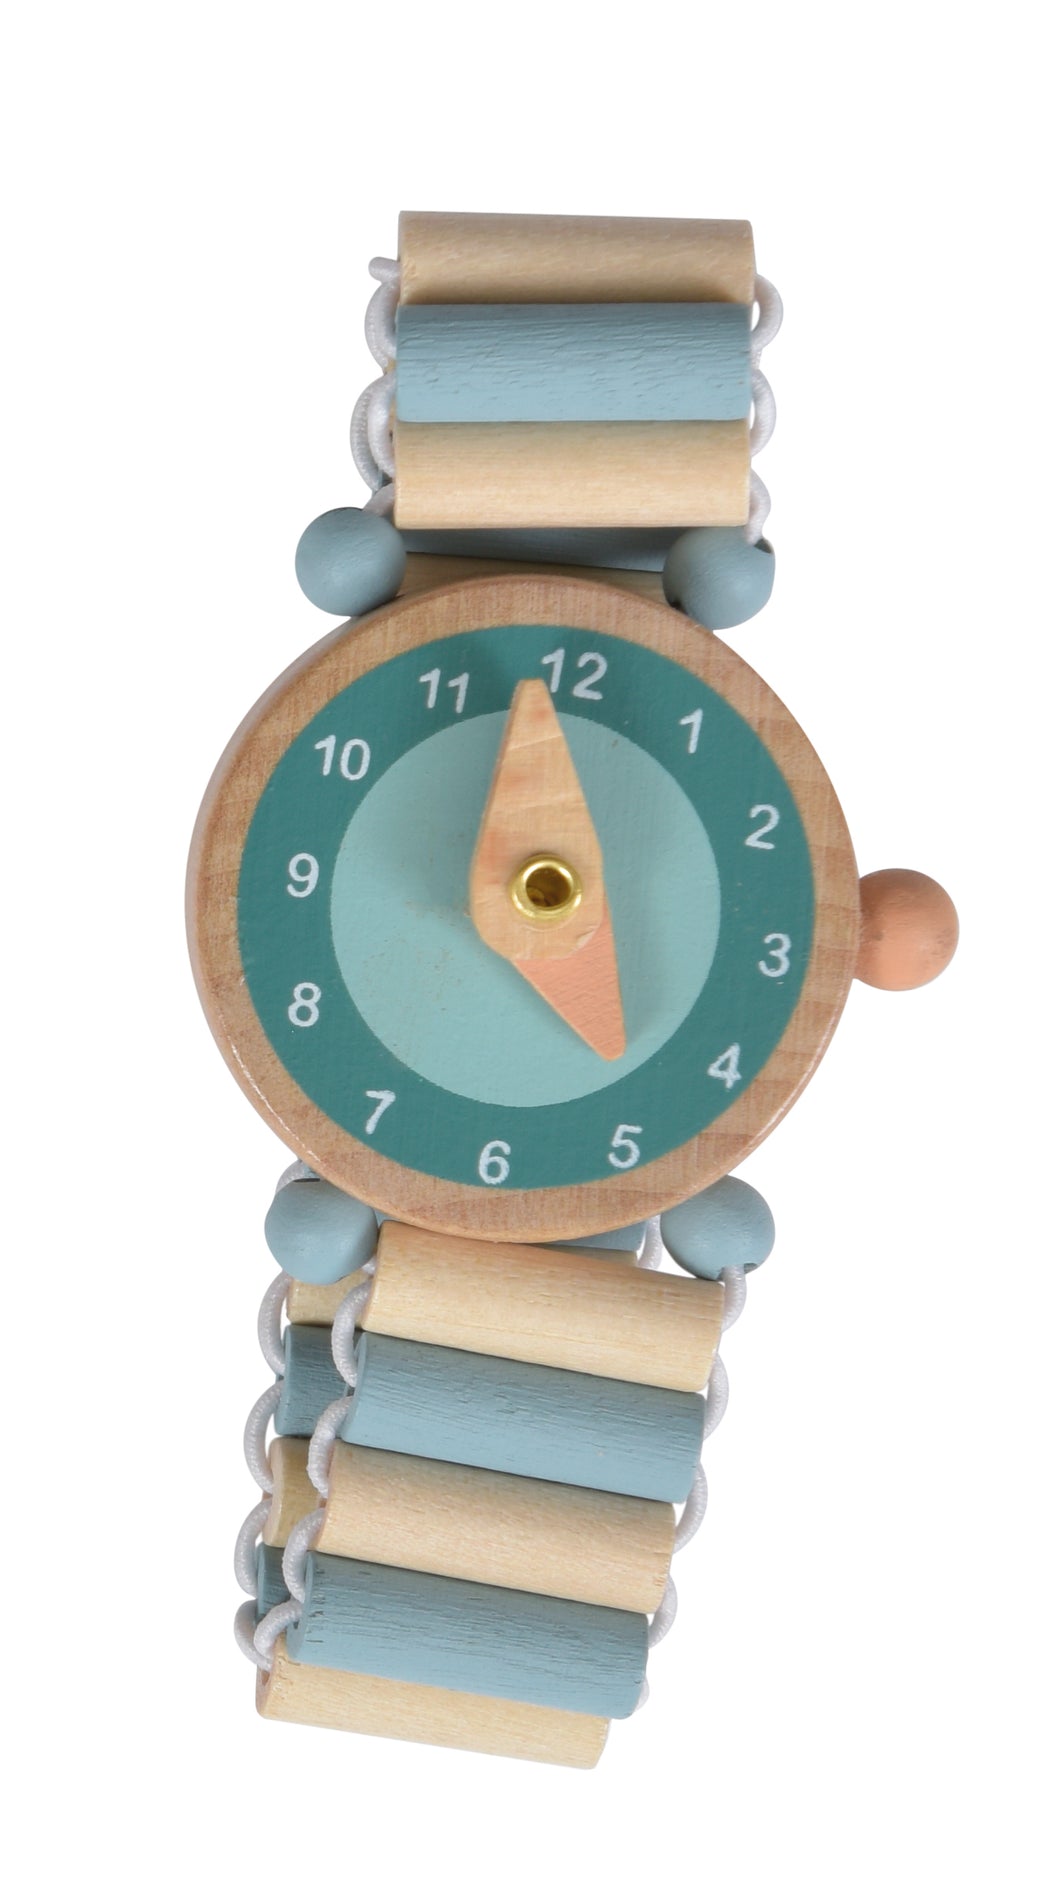 Les Petits by Egmont Toys Wooden Watch